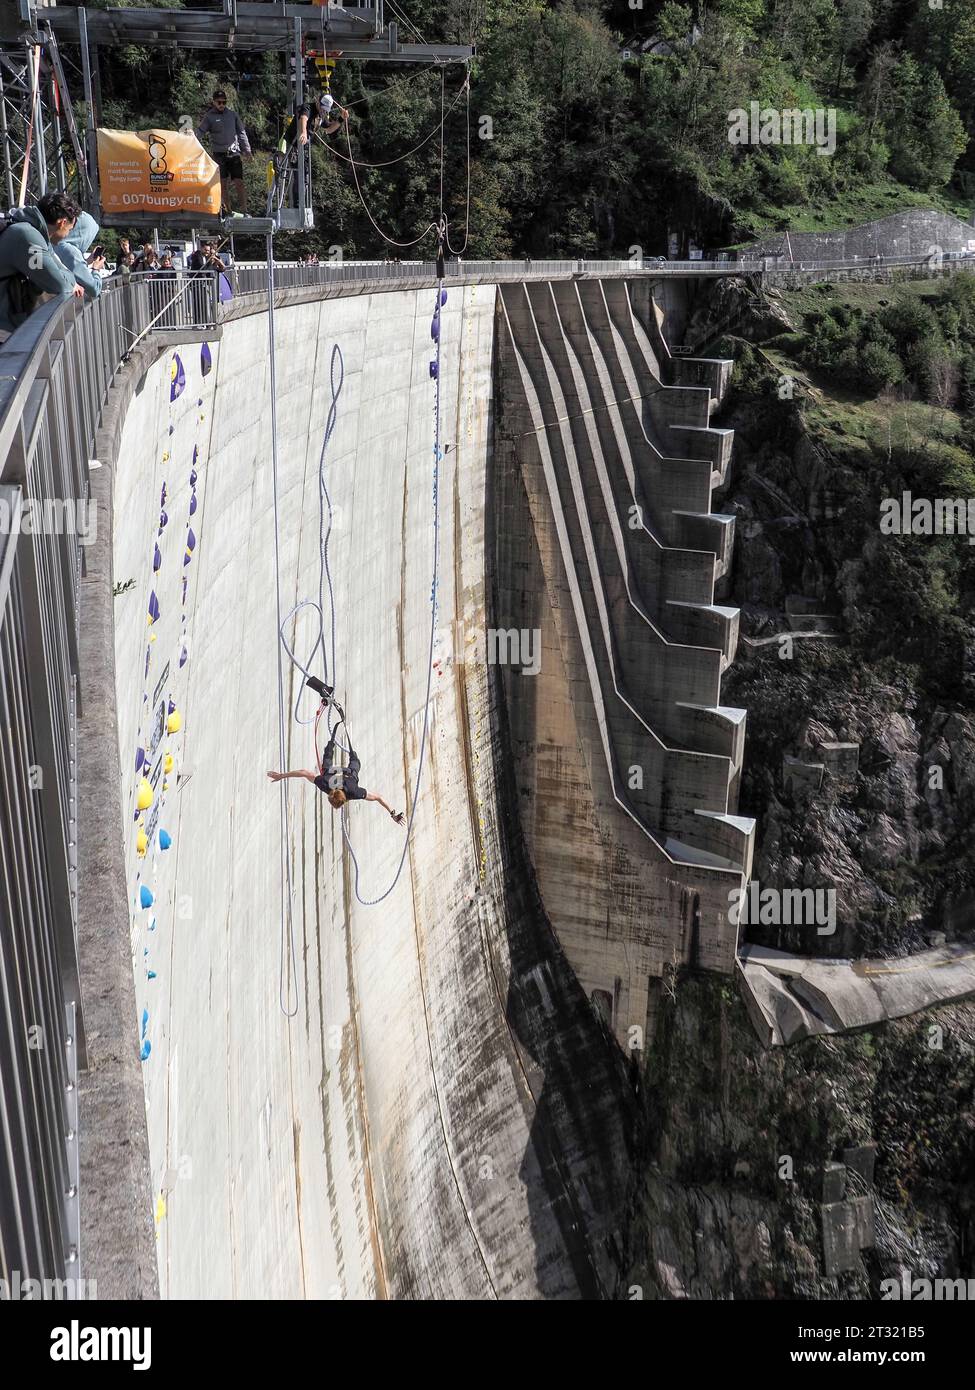 Contra Dam, Switzerland - October 22, 2023: Bunging jumping from the dam, 'The sign shows the name of the proposed activity' Stock Photo